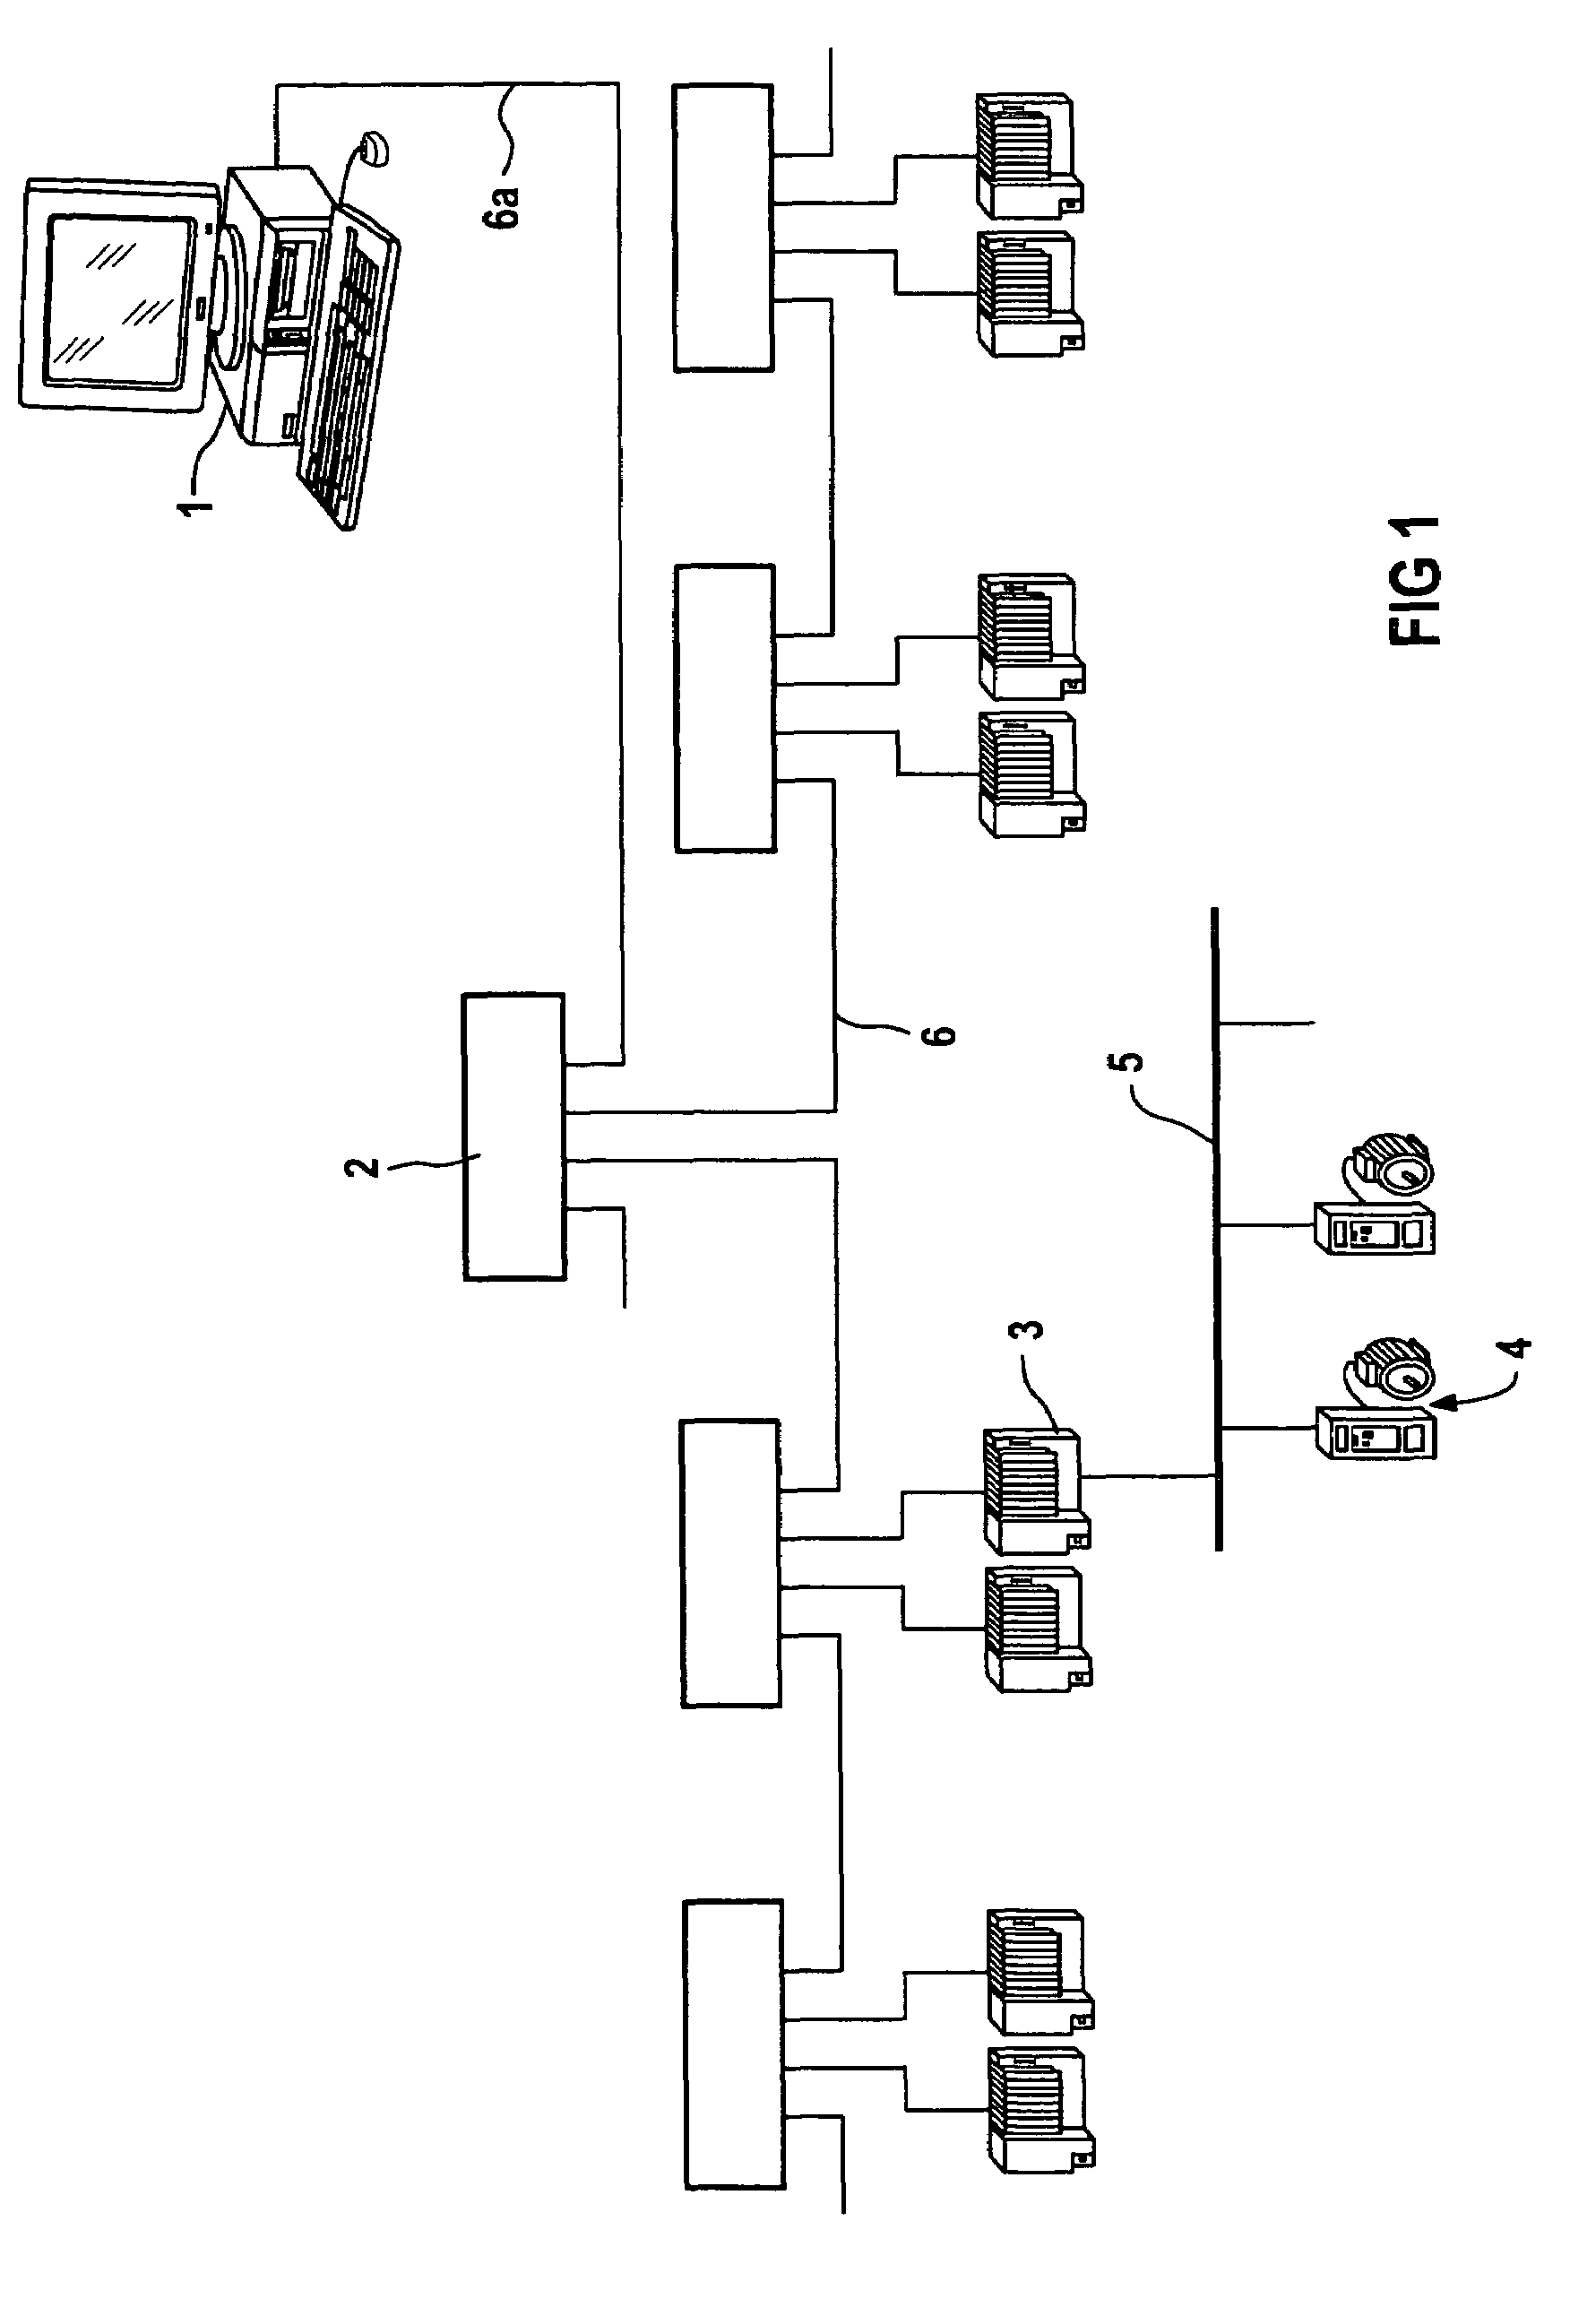 System and method for analyzing a network and/or generating the topology of a network